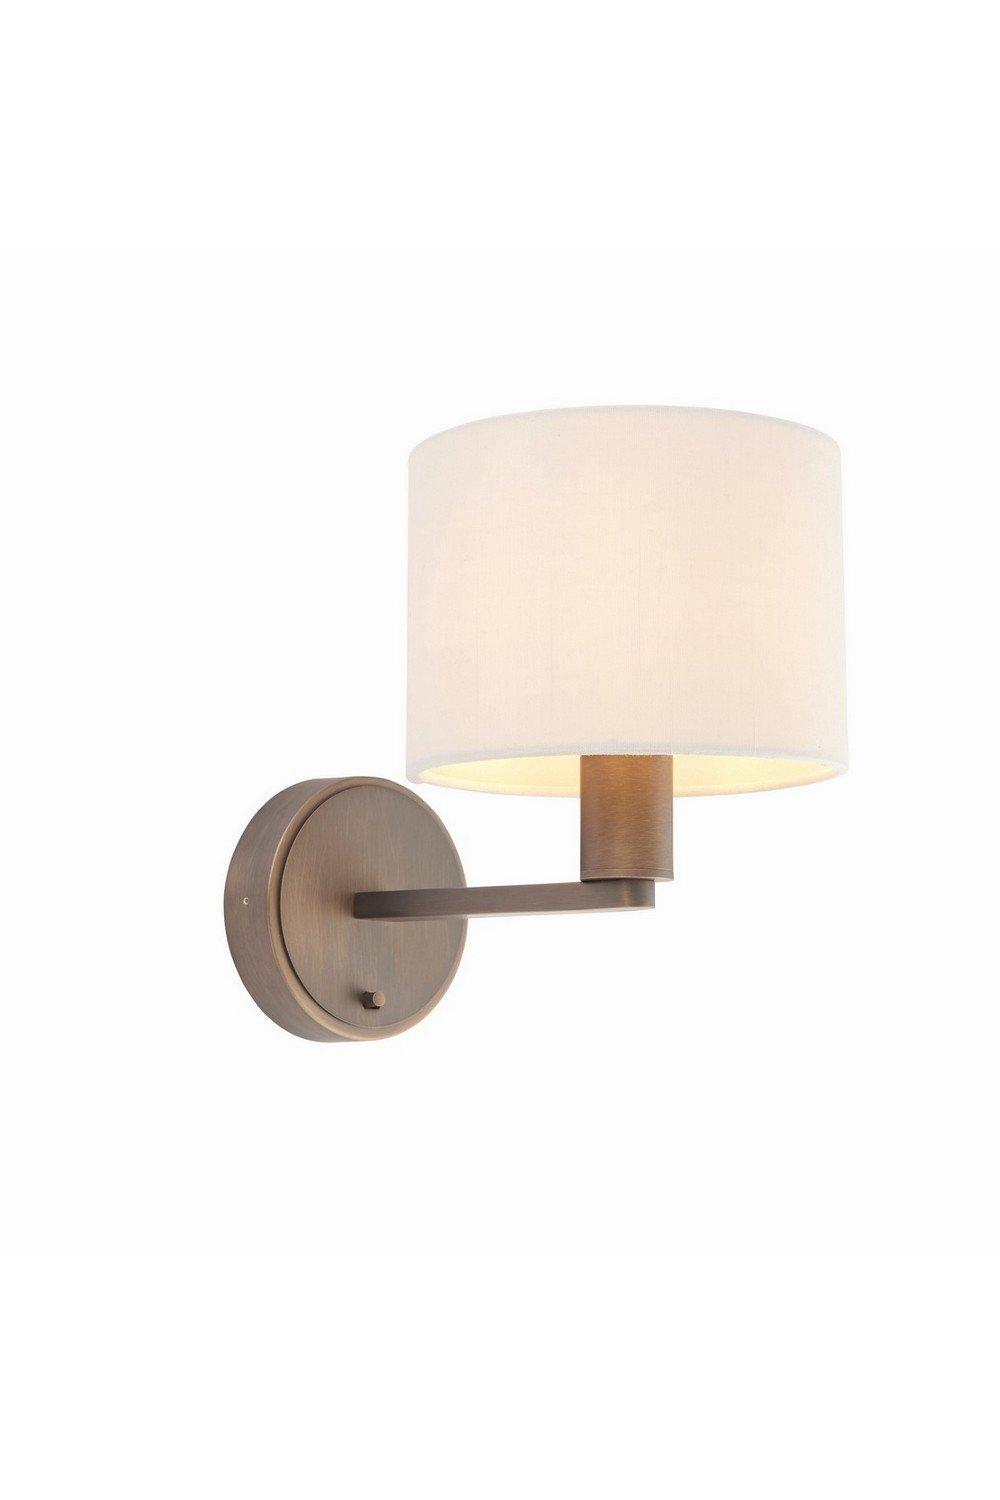 Daley Wall Lamp Antique Bronze Plate Marble Fabric Round Shade With Usb Socket